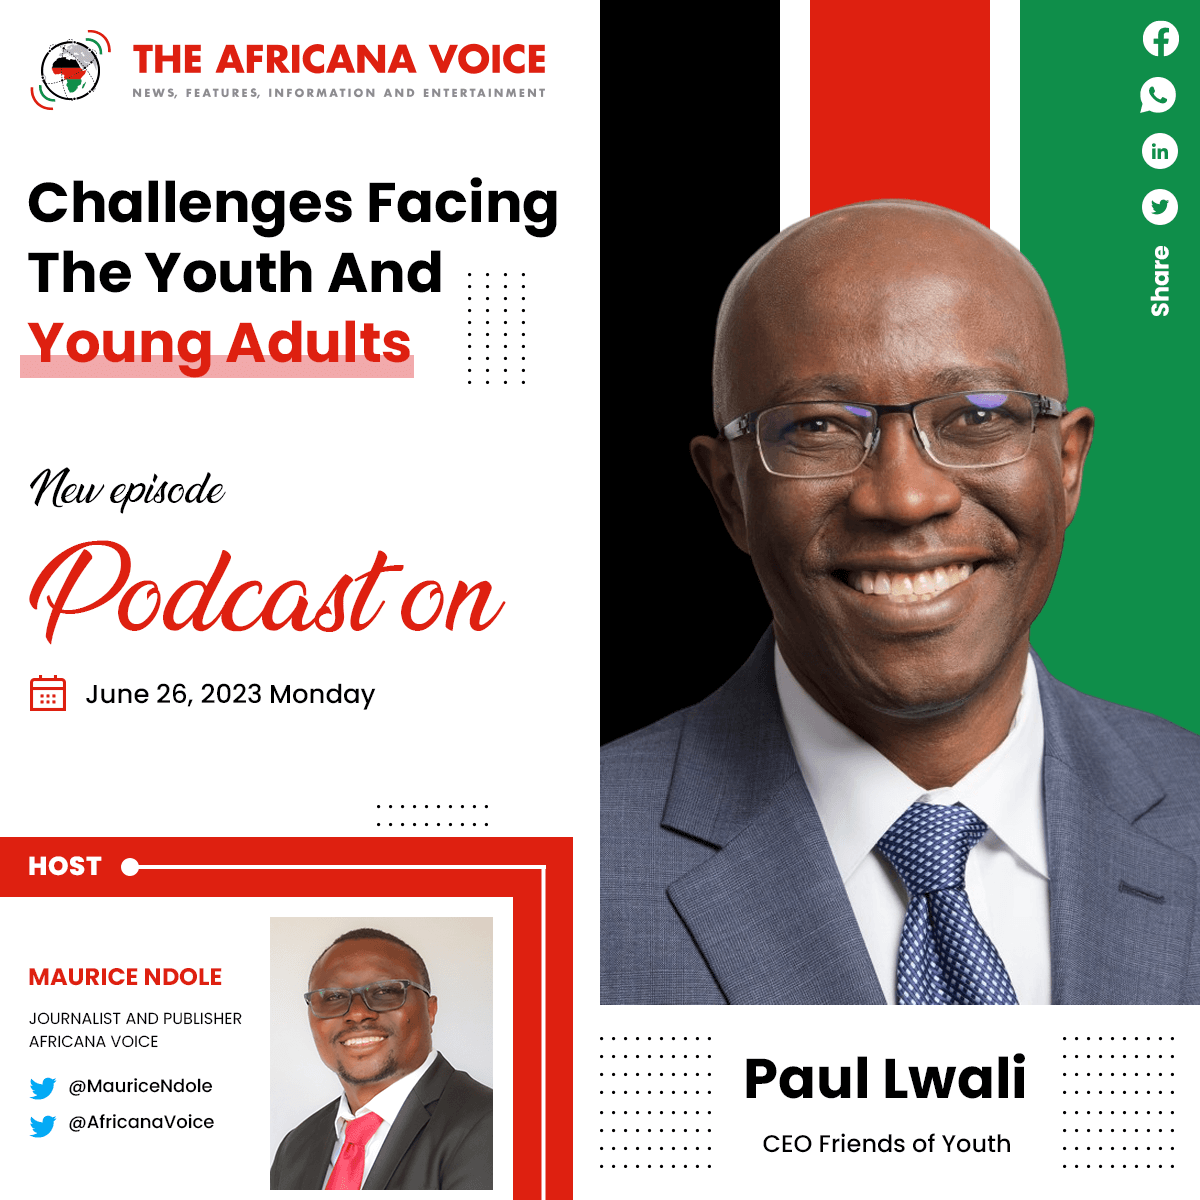 Challenges Facing the Youth and Young Adults, With Paul Lwali, CEO Friends of Youth